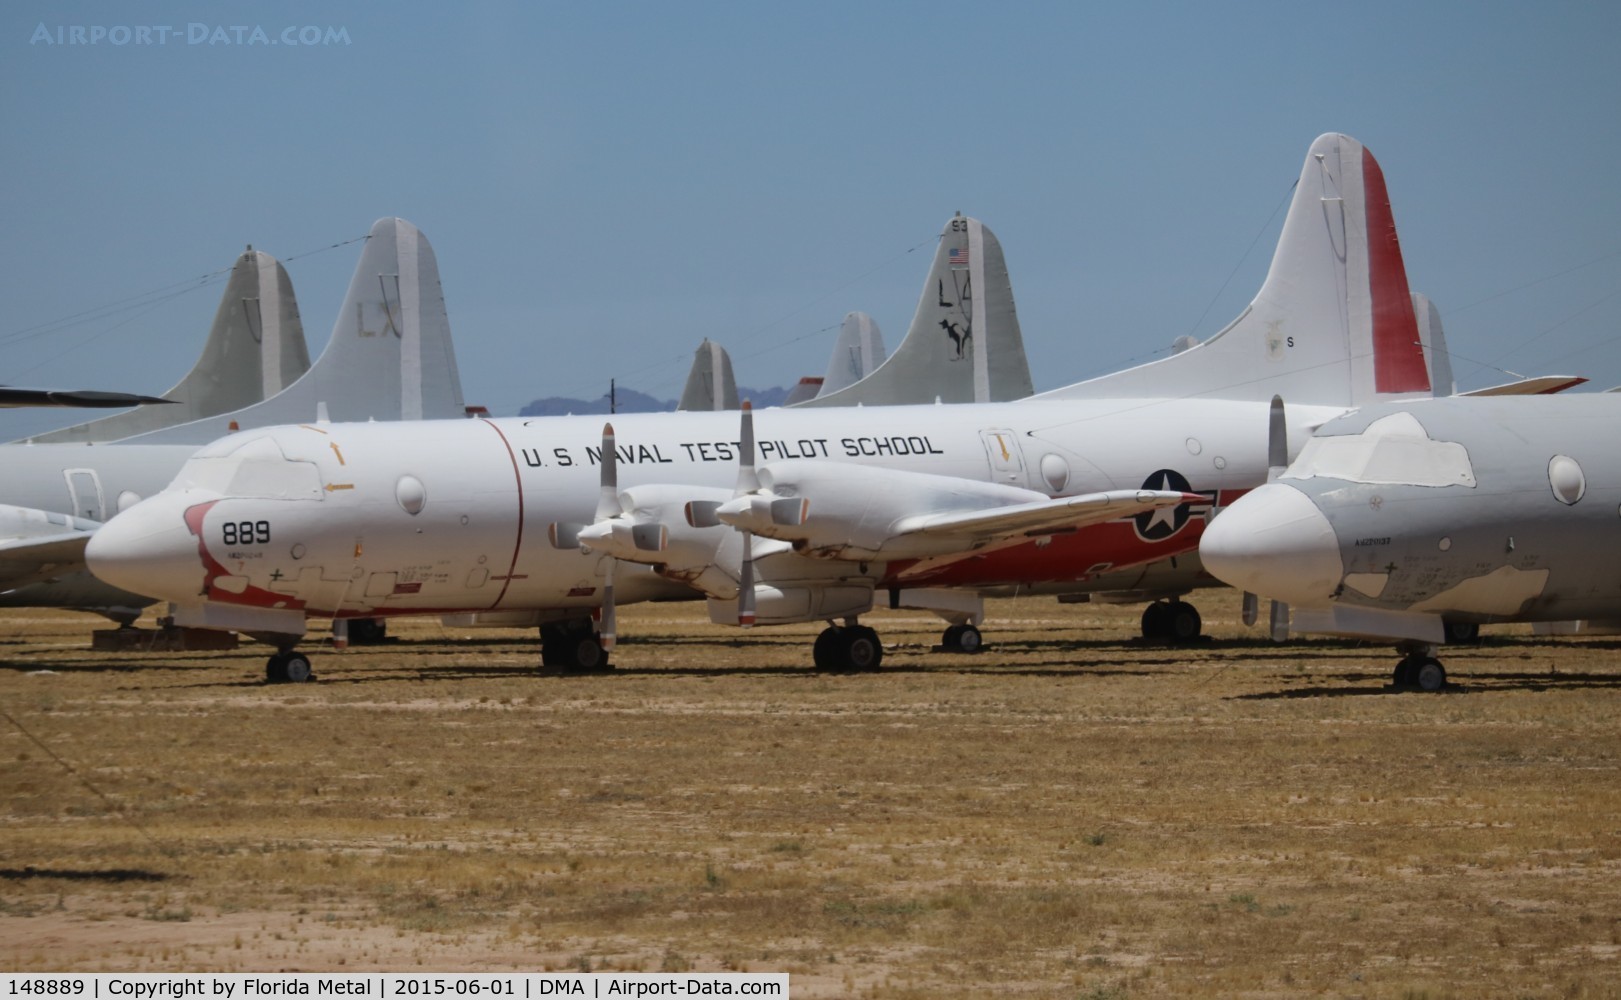 148889, Lockheed NP-3D Orion C/N 185-5007, NP-3D Orion